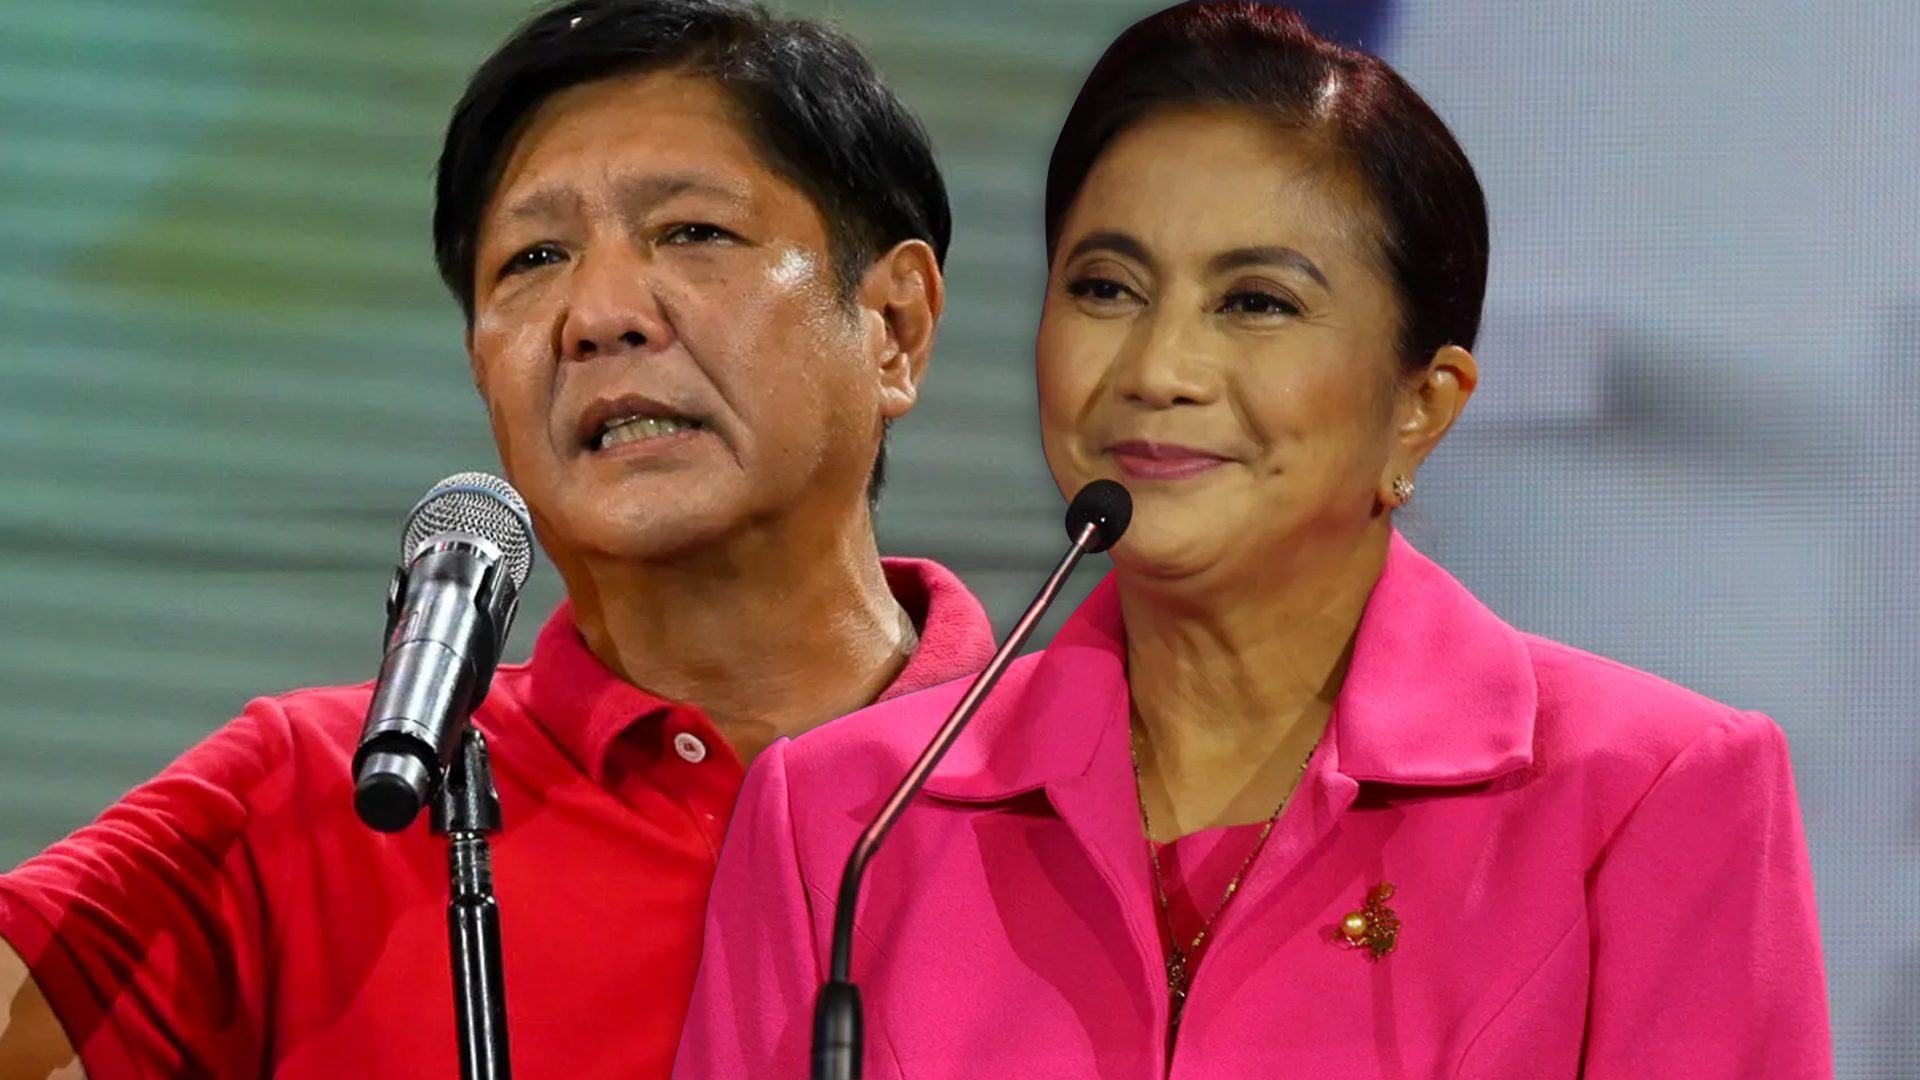 Robredo challenges Marcos to one-on-one debate: ‘We owe it to the people’